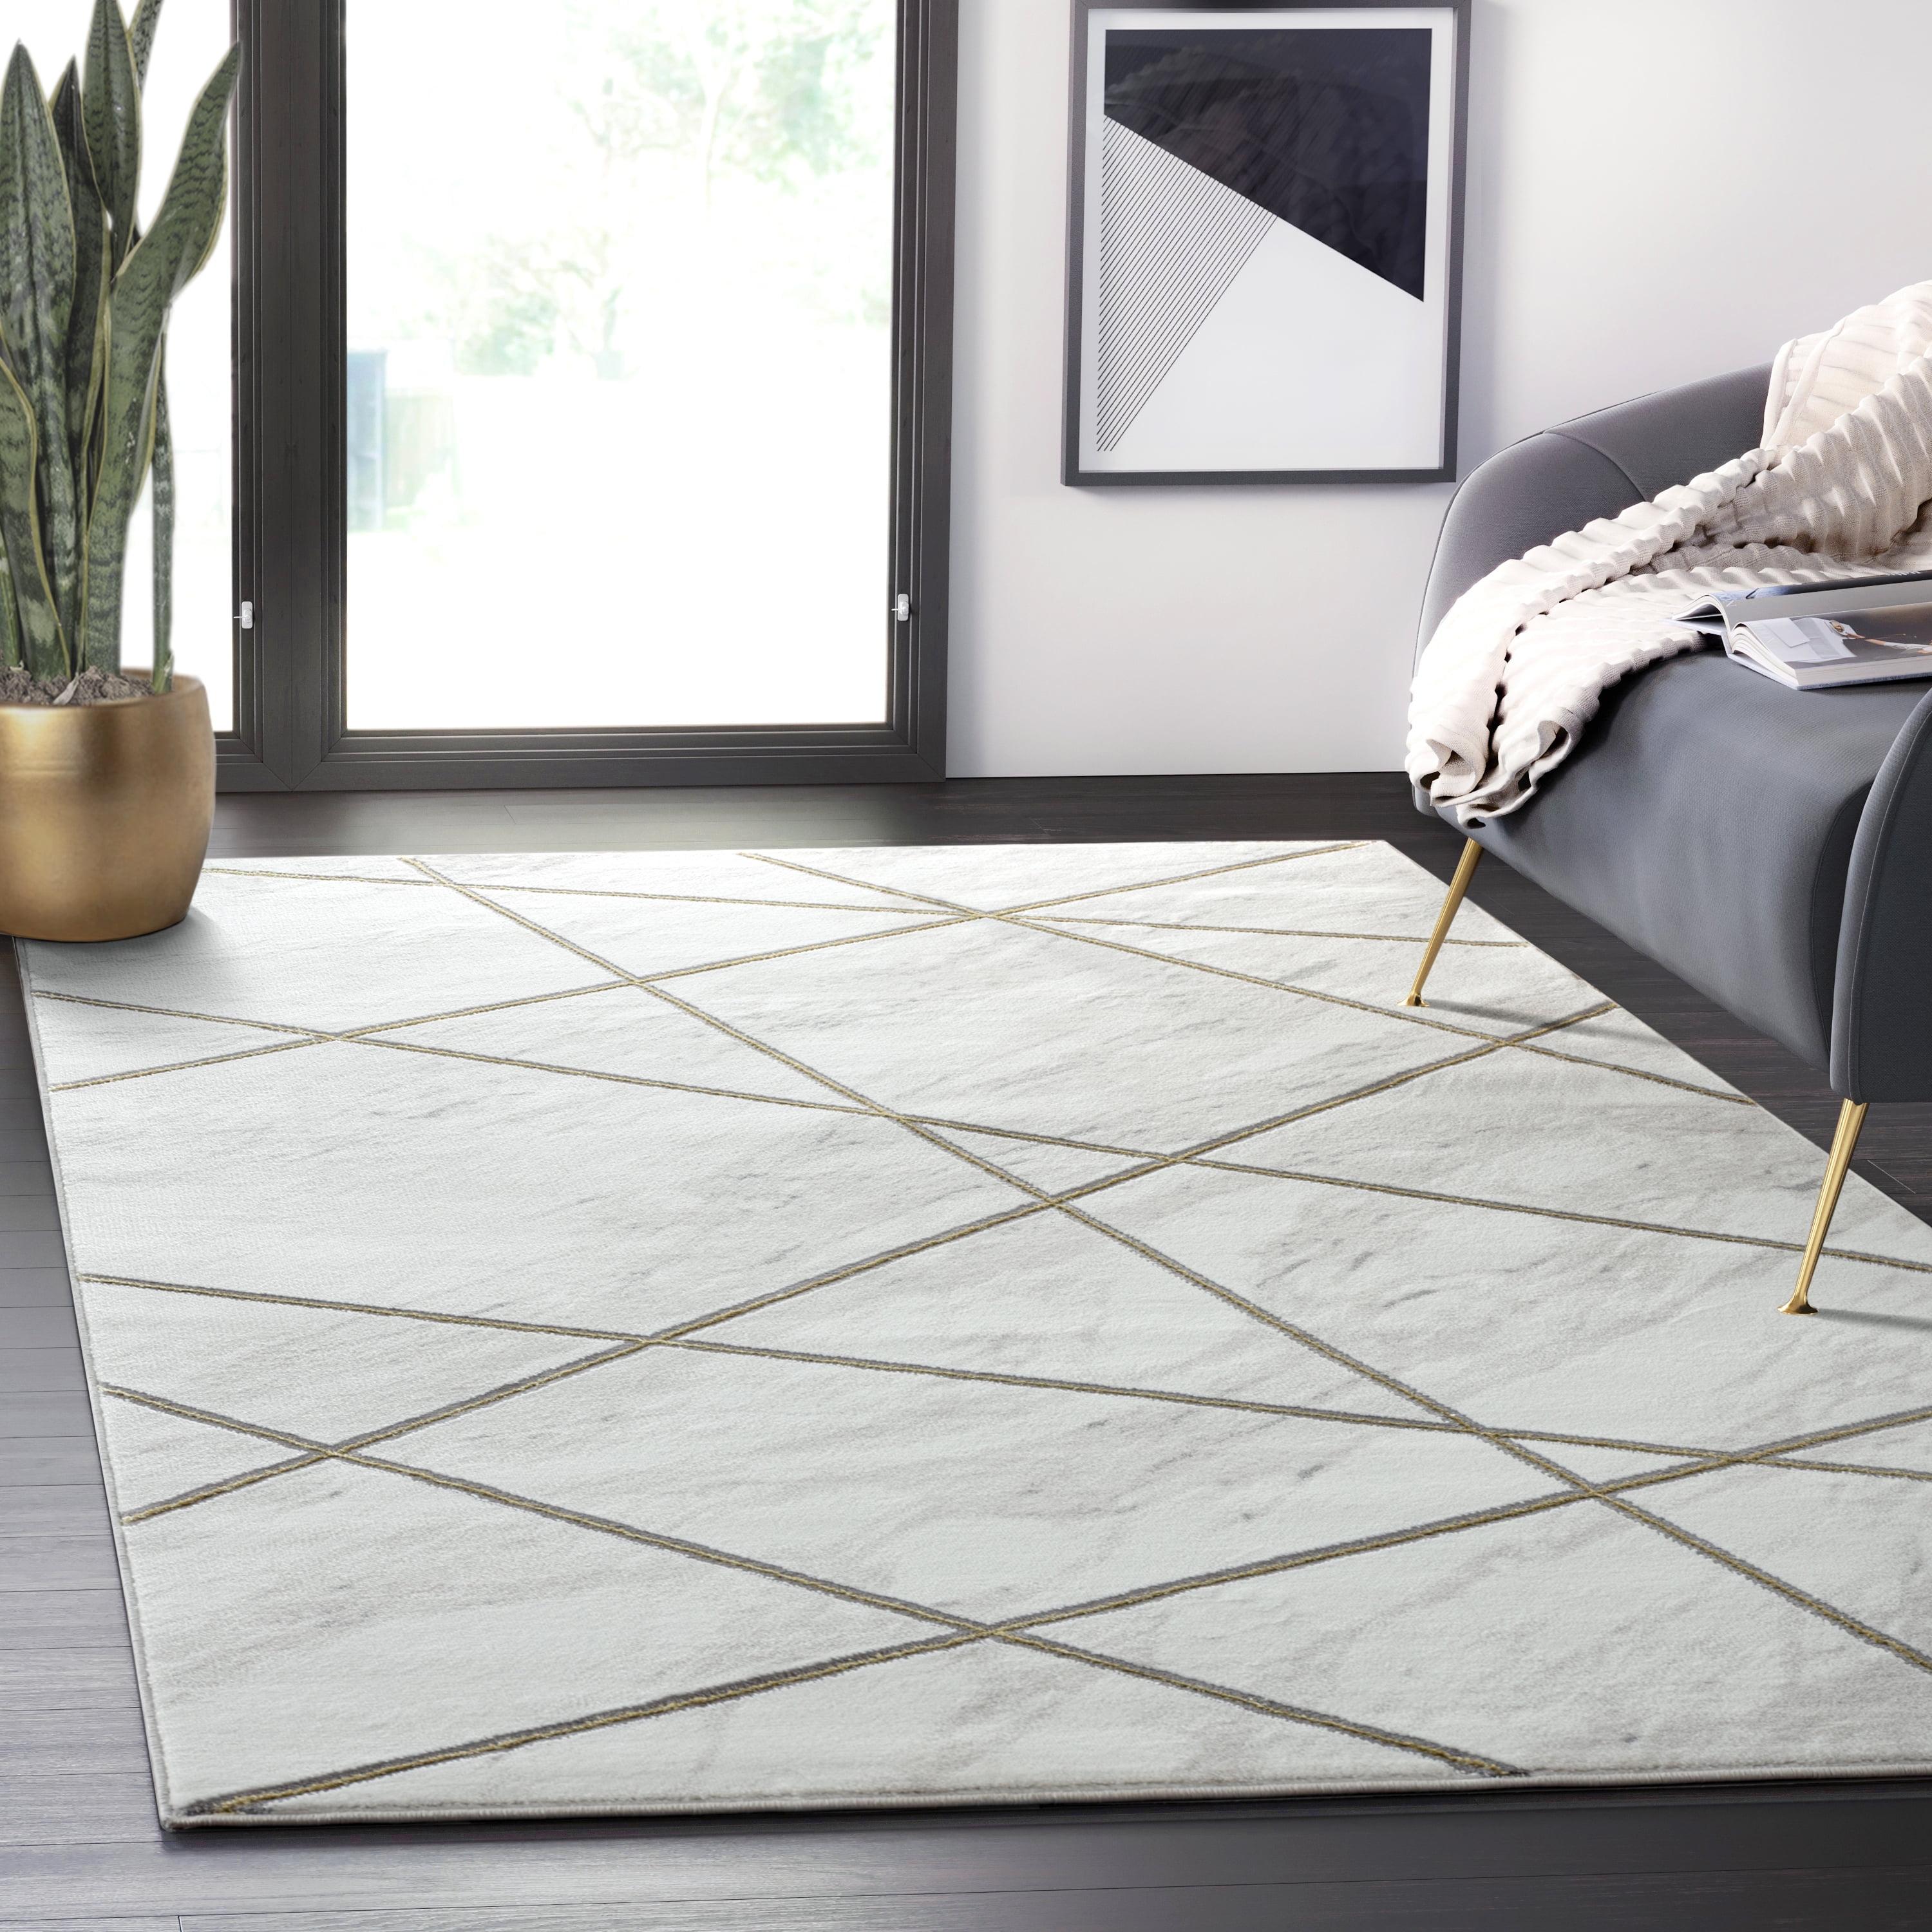 Luxurious Gray Marble Synthetic 6' x 9' Area Rug with Gold Accents